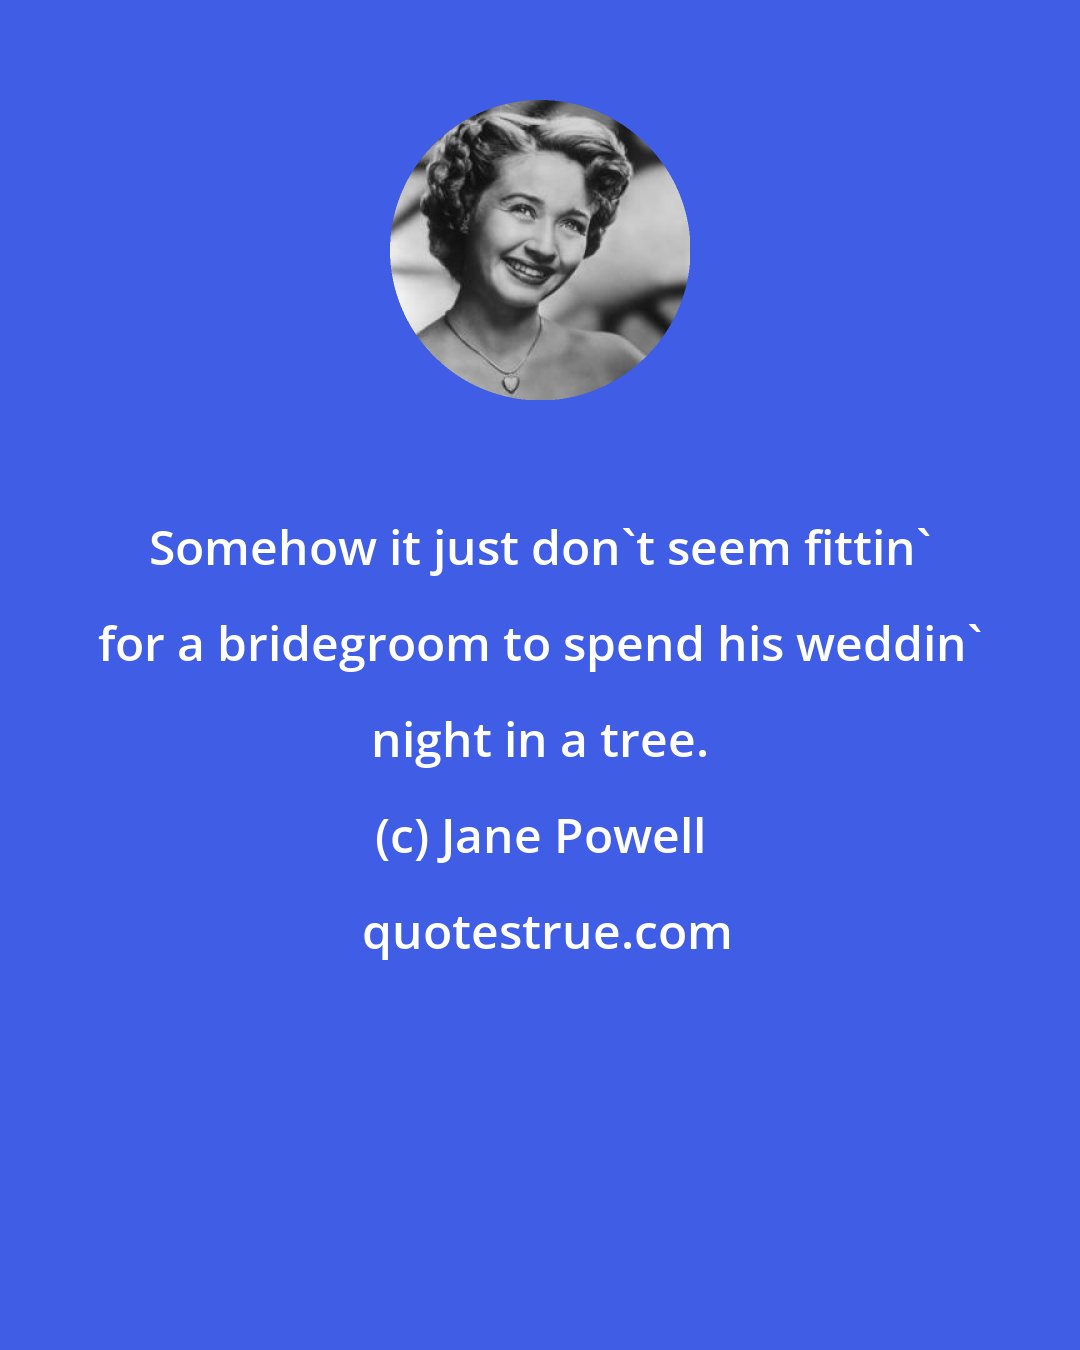 Jane Powell: Somehow it just don't seem fittin' for a bridegroom to spend his weddin' night in a tree.